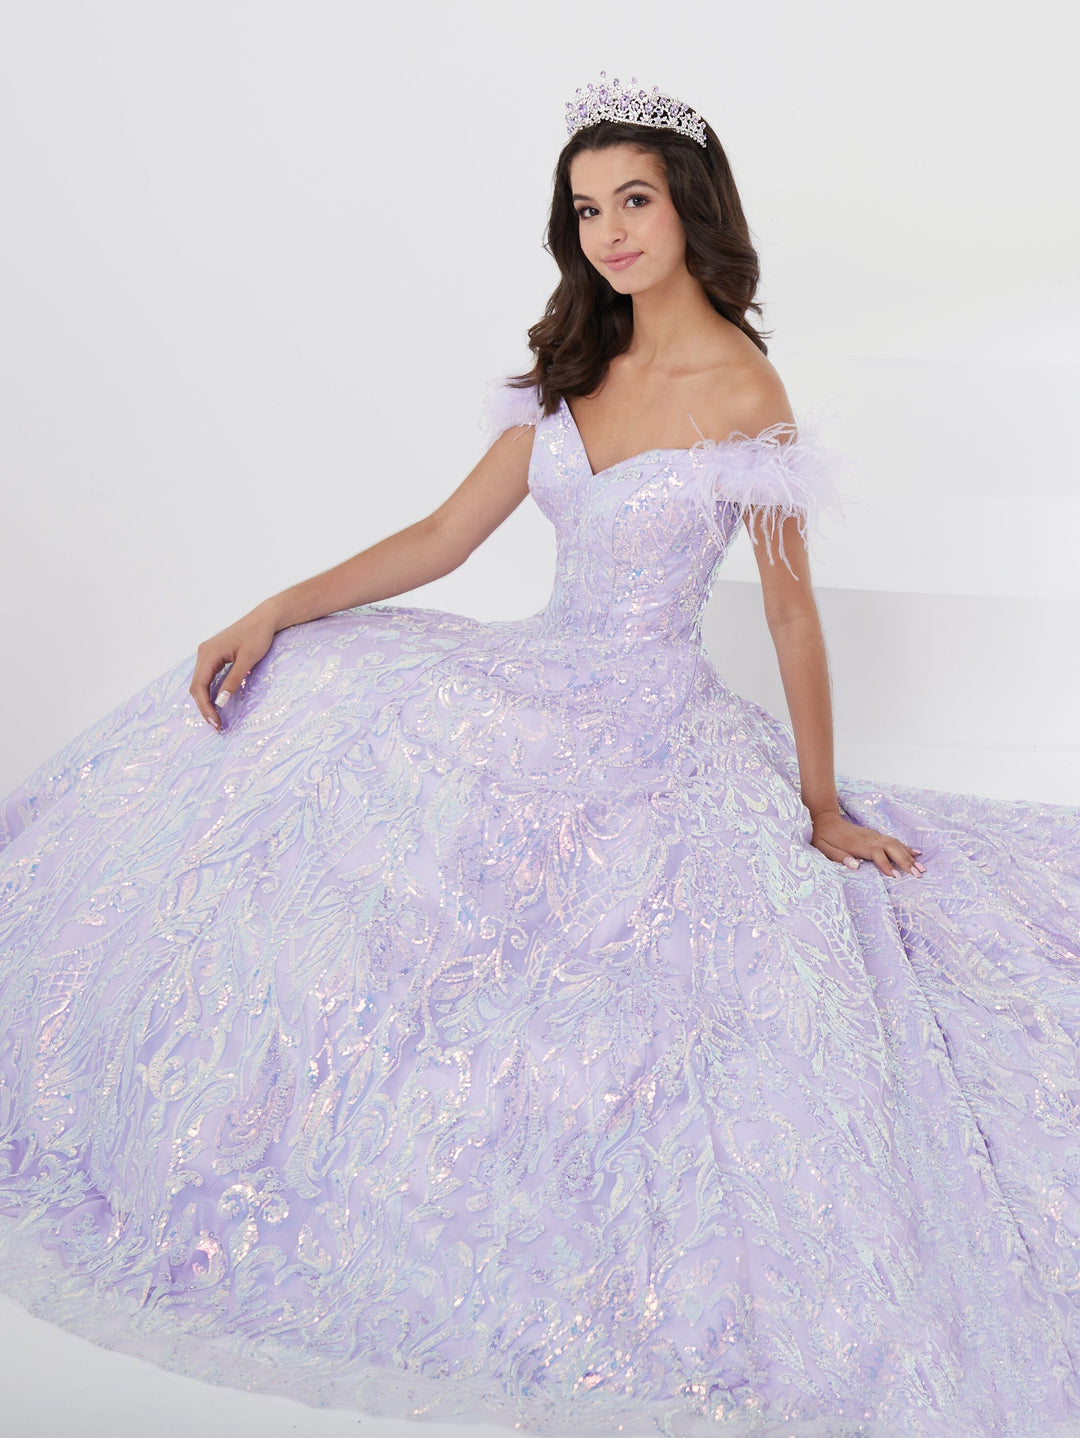 Sequin Feather Quinceanera Dress by Fiesta Gowns 56464